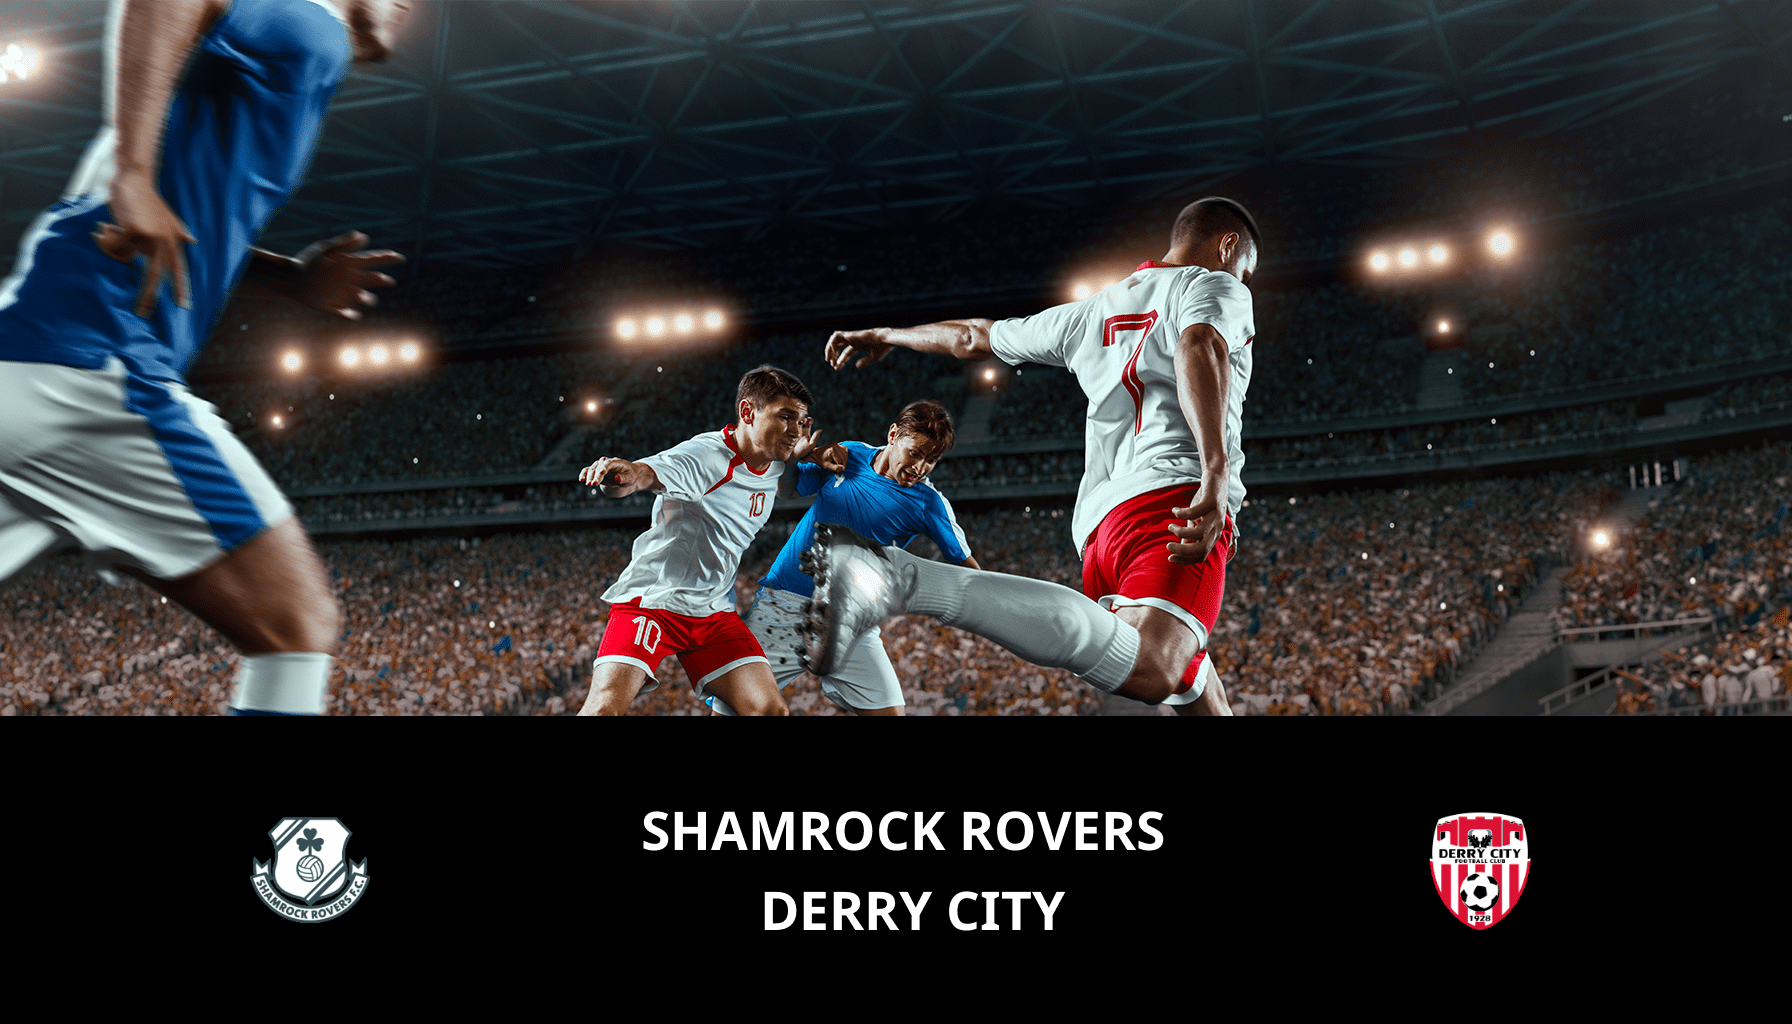 Previsione per Shamrock Rovers VS Derry City il 20/05/2024 Analysis of the match